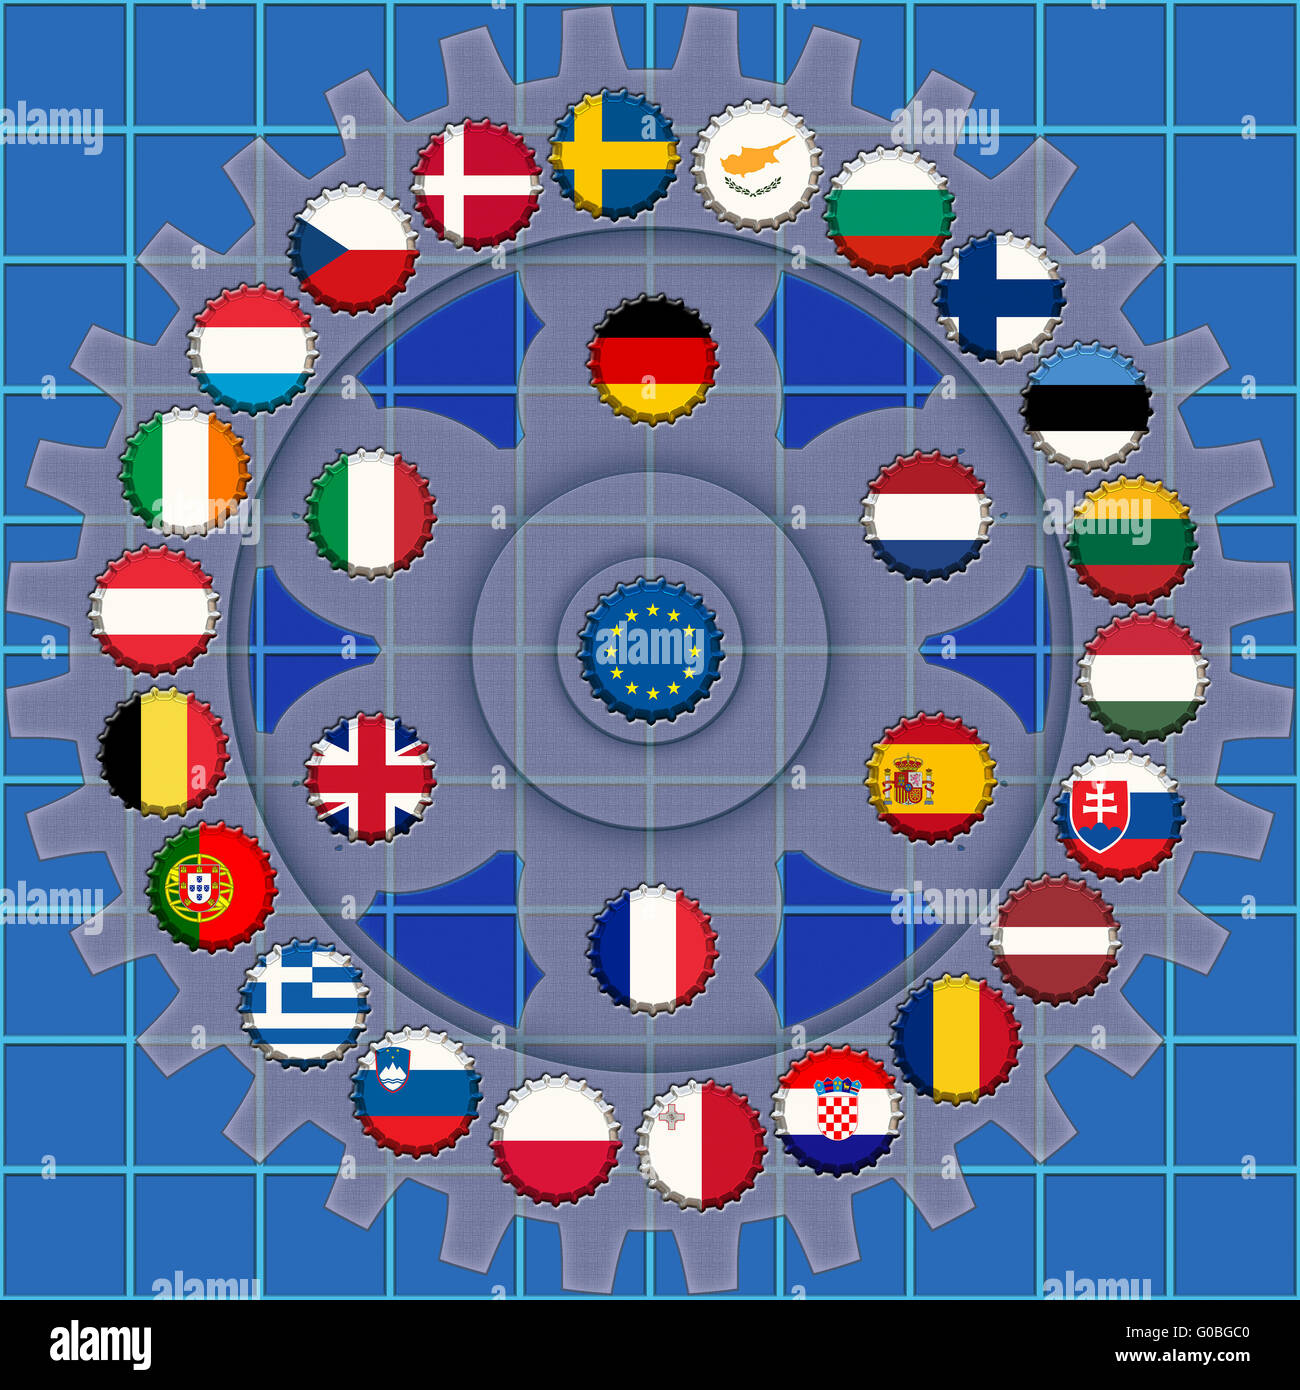 colors of the member states of the European Union Stock Photo